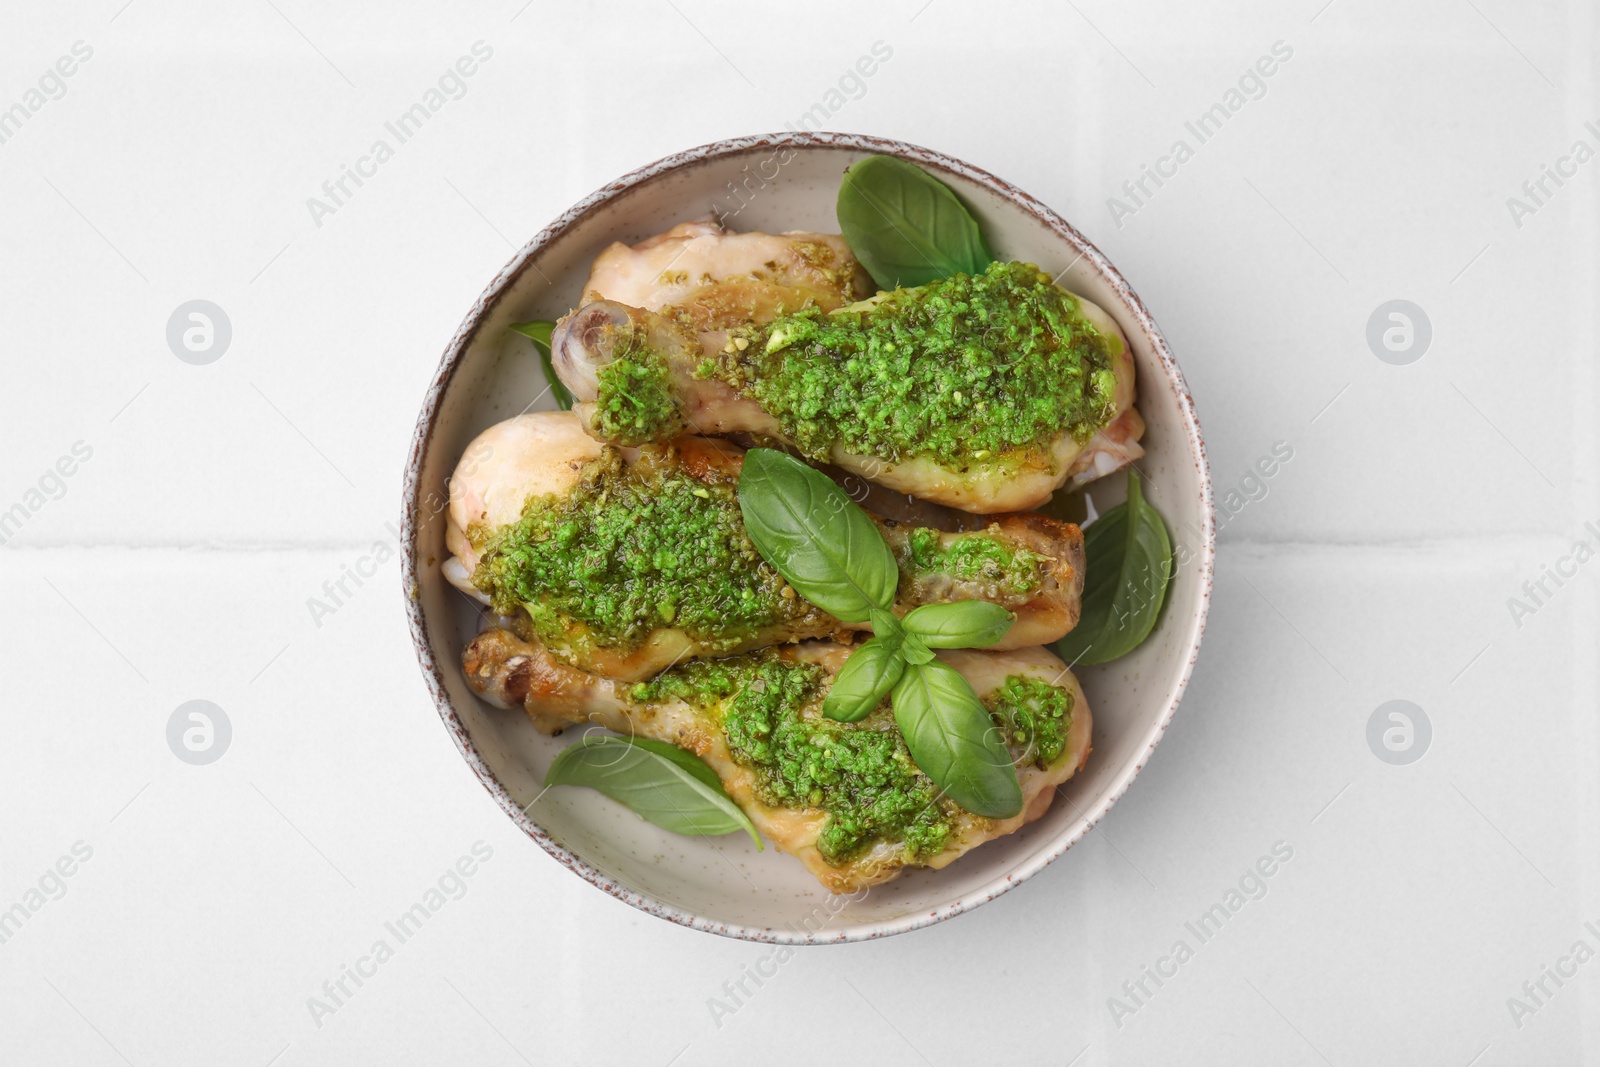 Photo of Delicious fried chicken drumsticks with pesto sauce and basil in bowl on white tiled table, top view